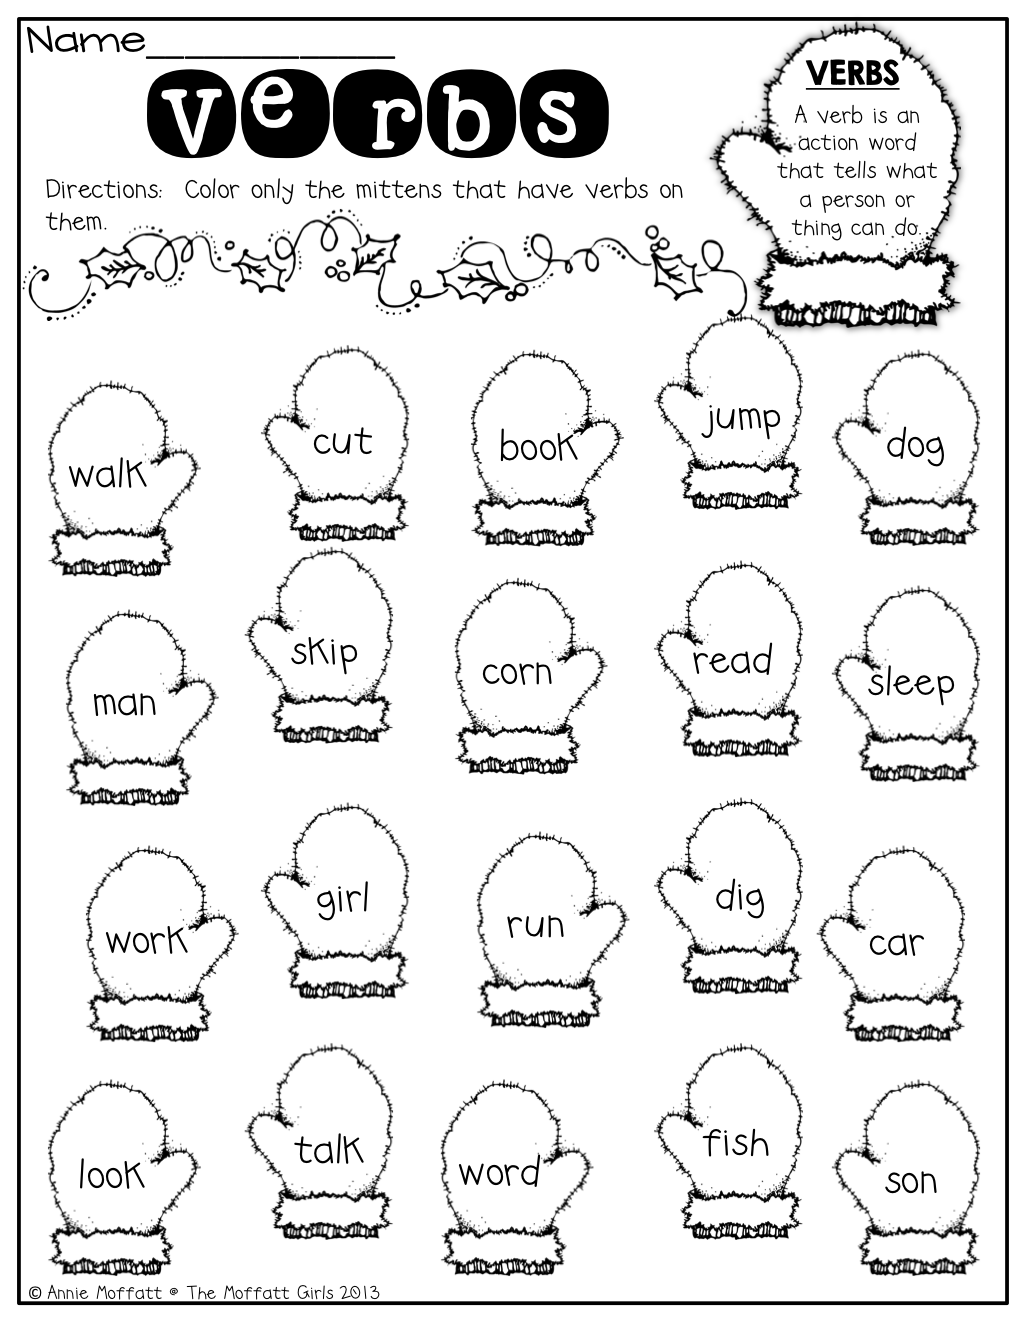 Verbs! Color The Mittens That Have Verbs!